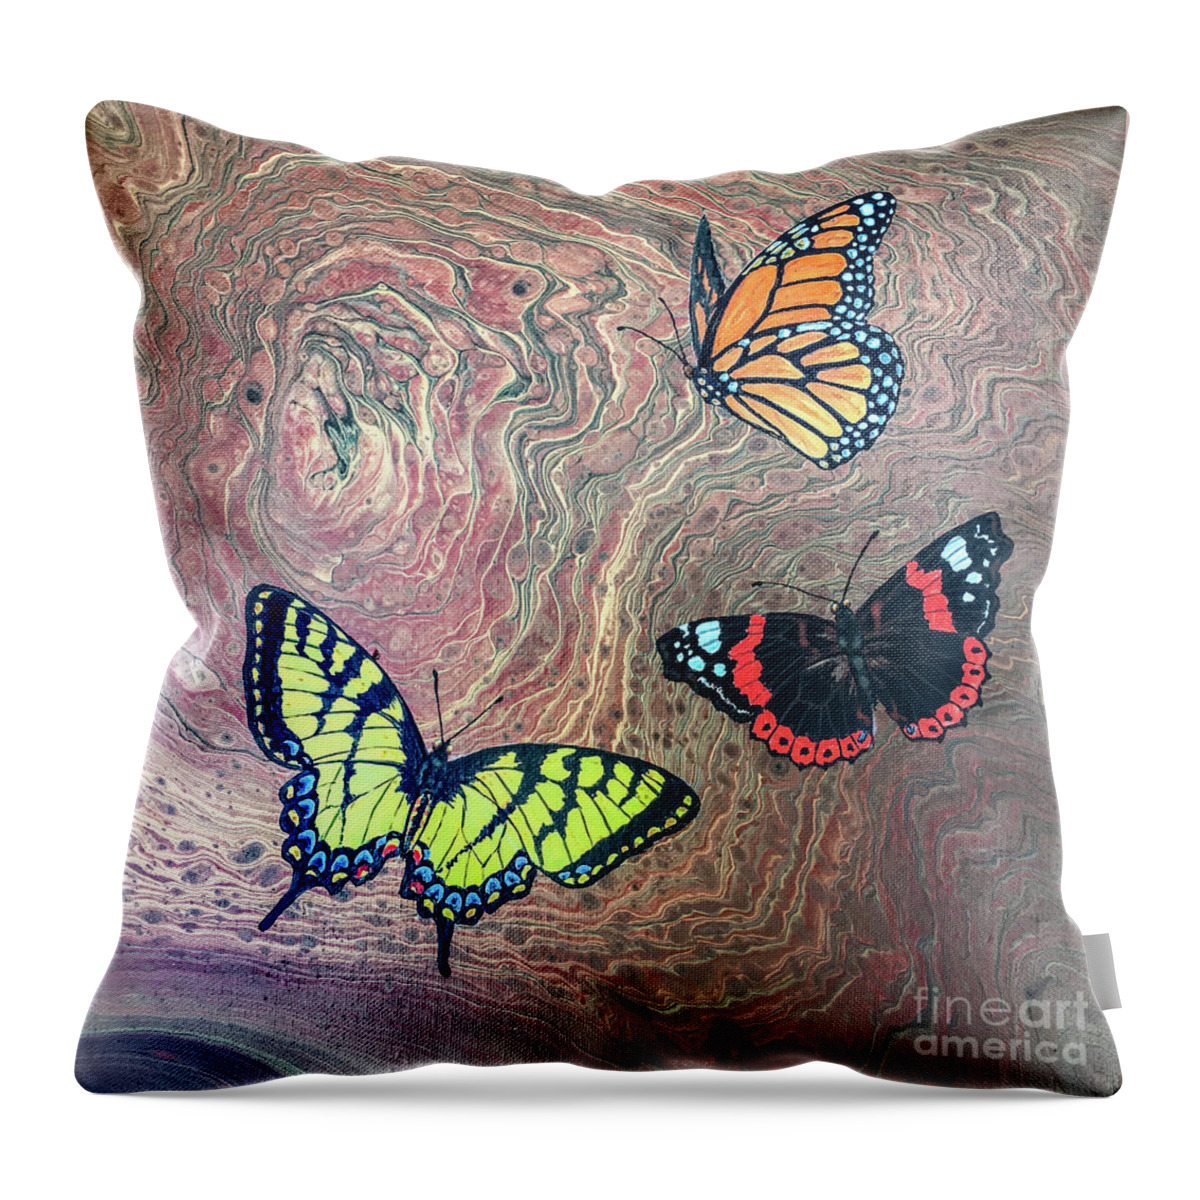 Butterflies Throw Pillow featuring the painting California Butterflies by Lucy Arnold